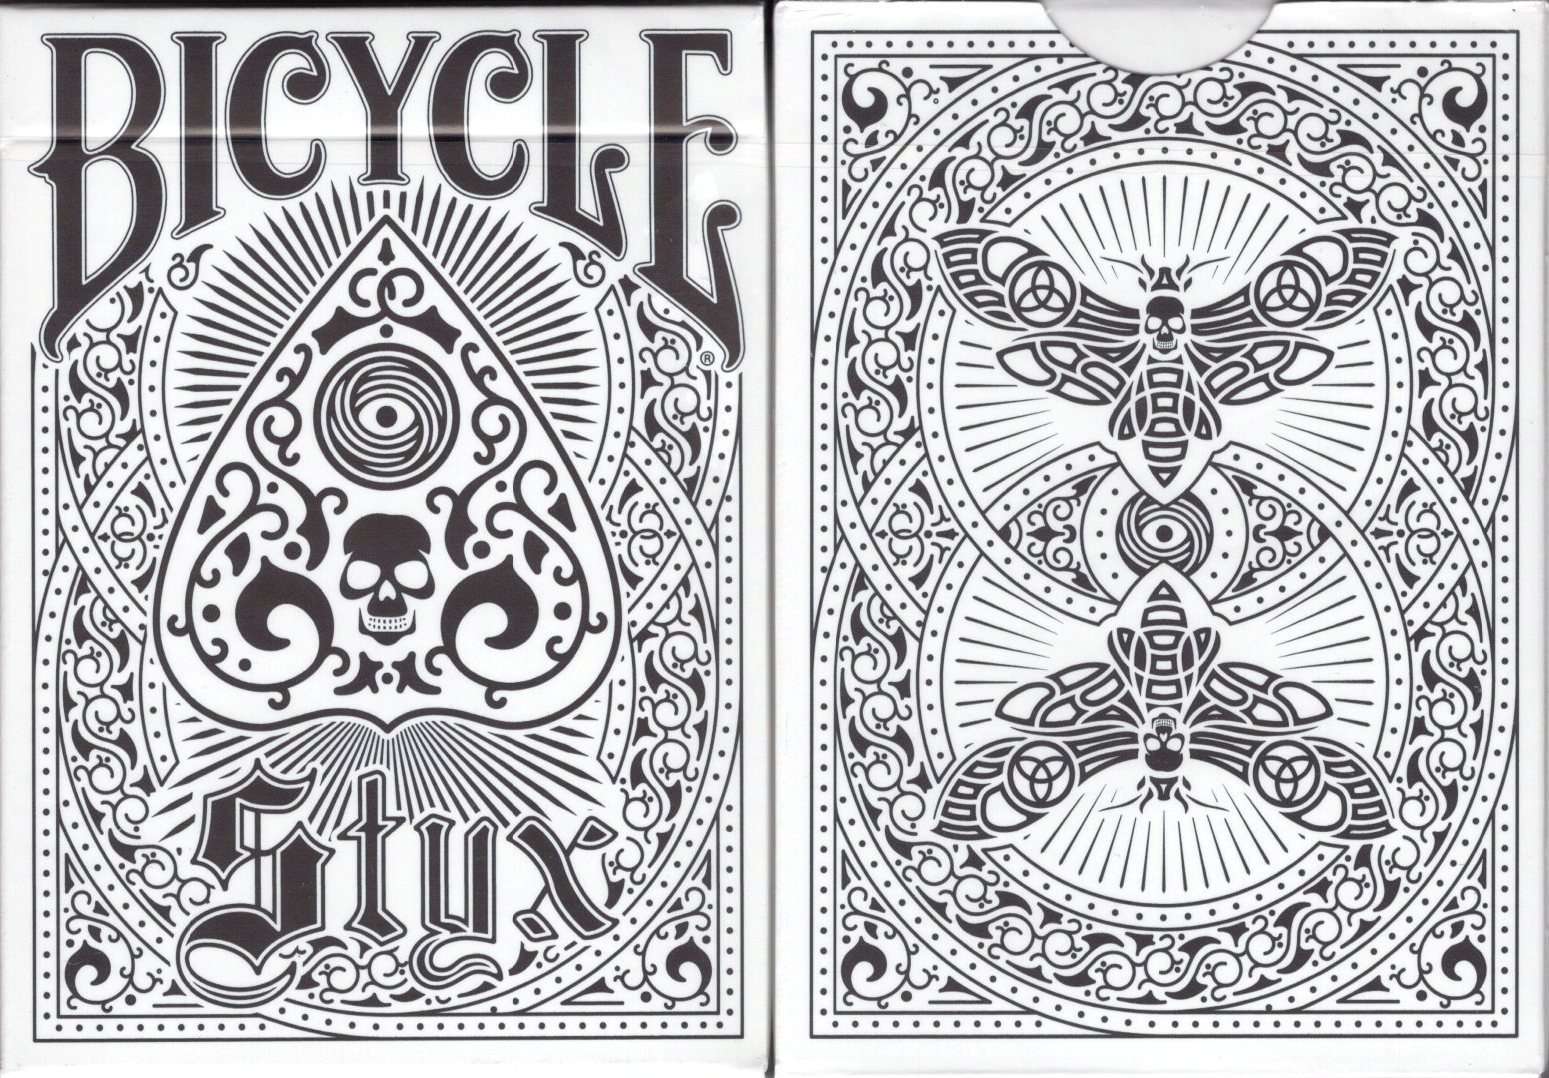 PlayingCardDecks.com-Styx White Bicycle Playing Cards